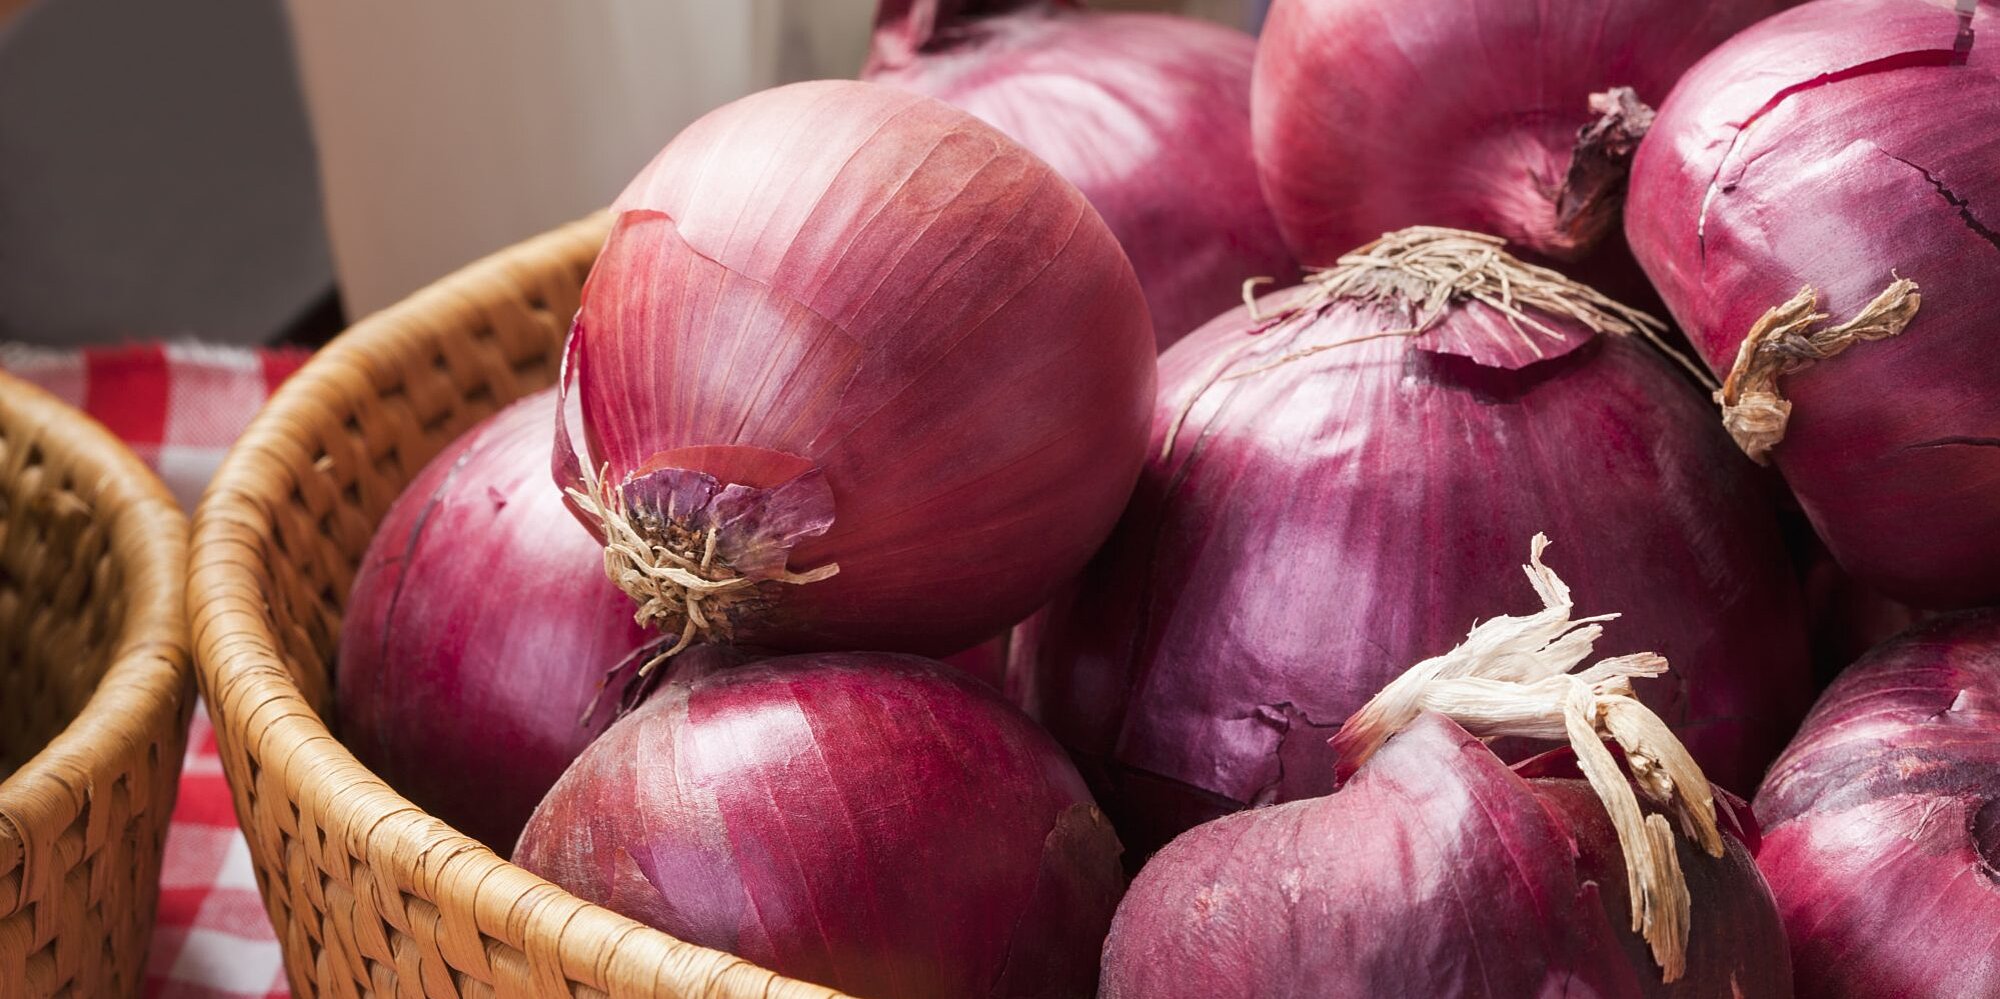 Salmonella outbreak linked to onions in the U.S